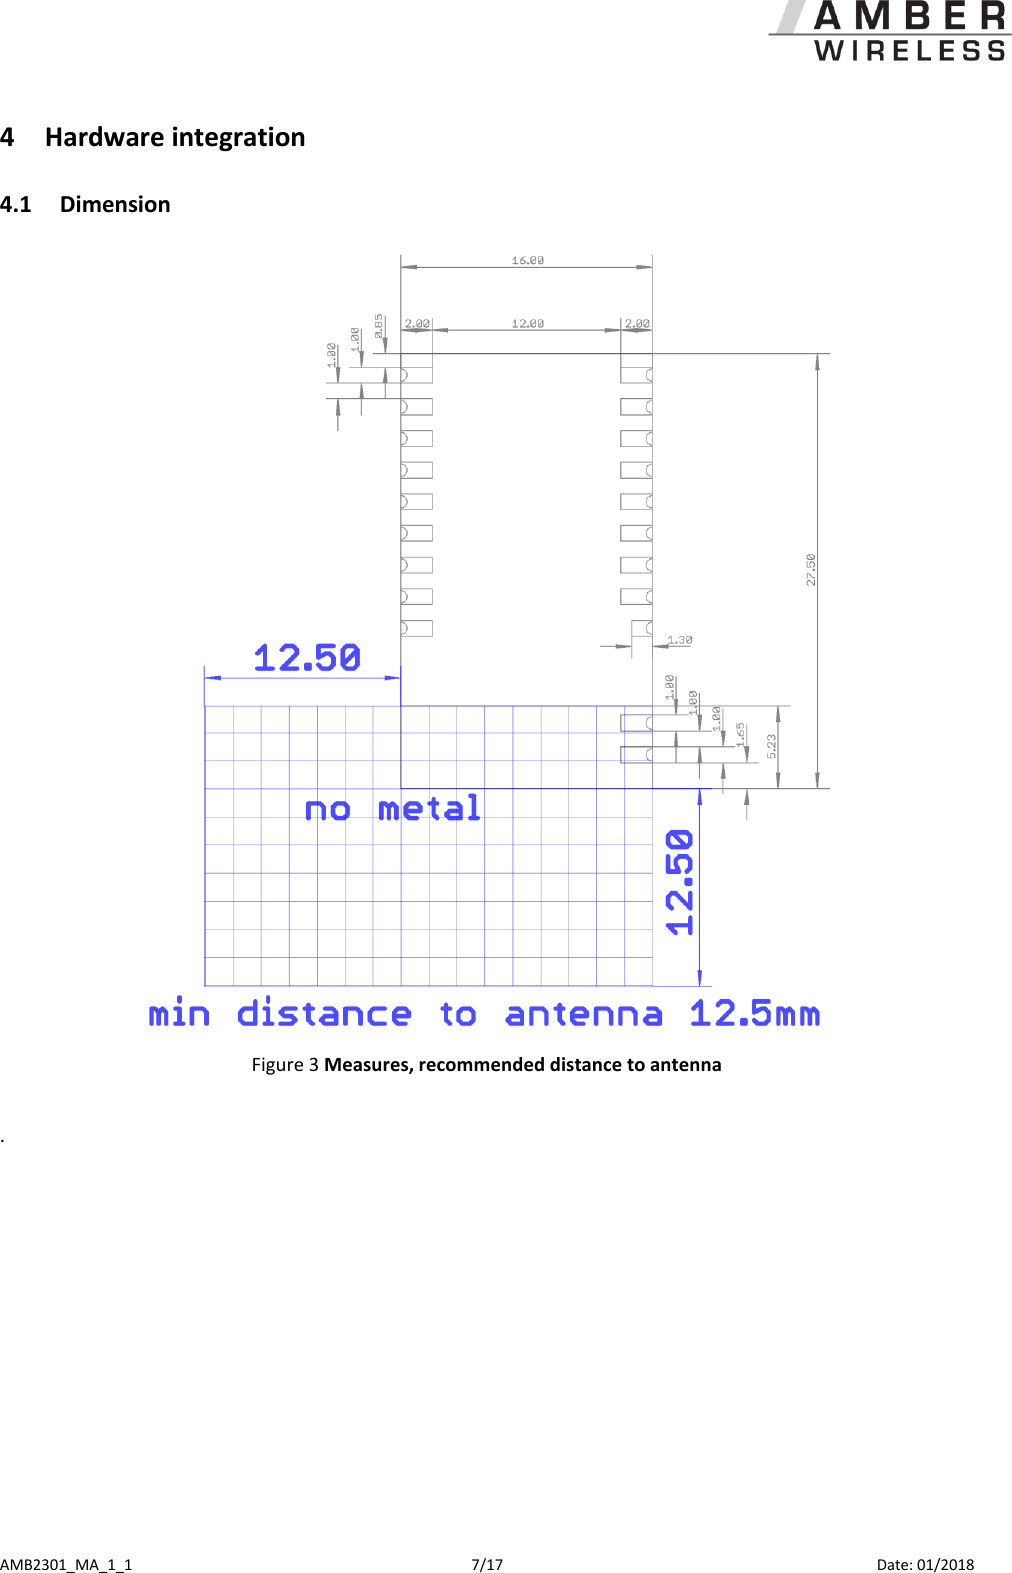  AMB2301_MA_1_1  7/17     Date: 01/2018 4 Hardware integration  4.1 Dimension   Figure 3 Measures, recommended distance to antenna  .  